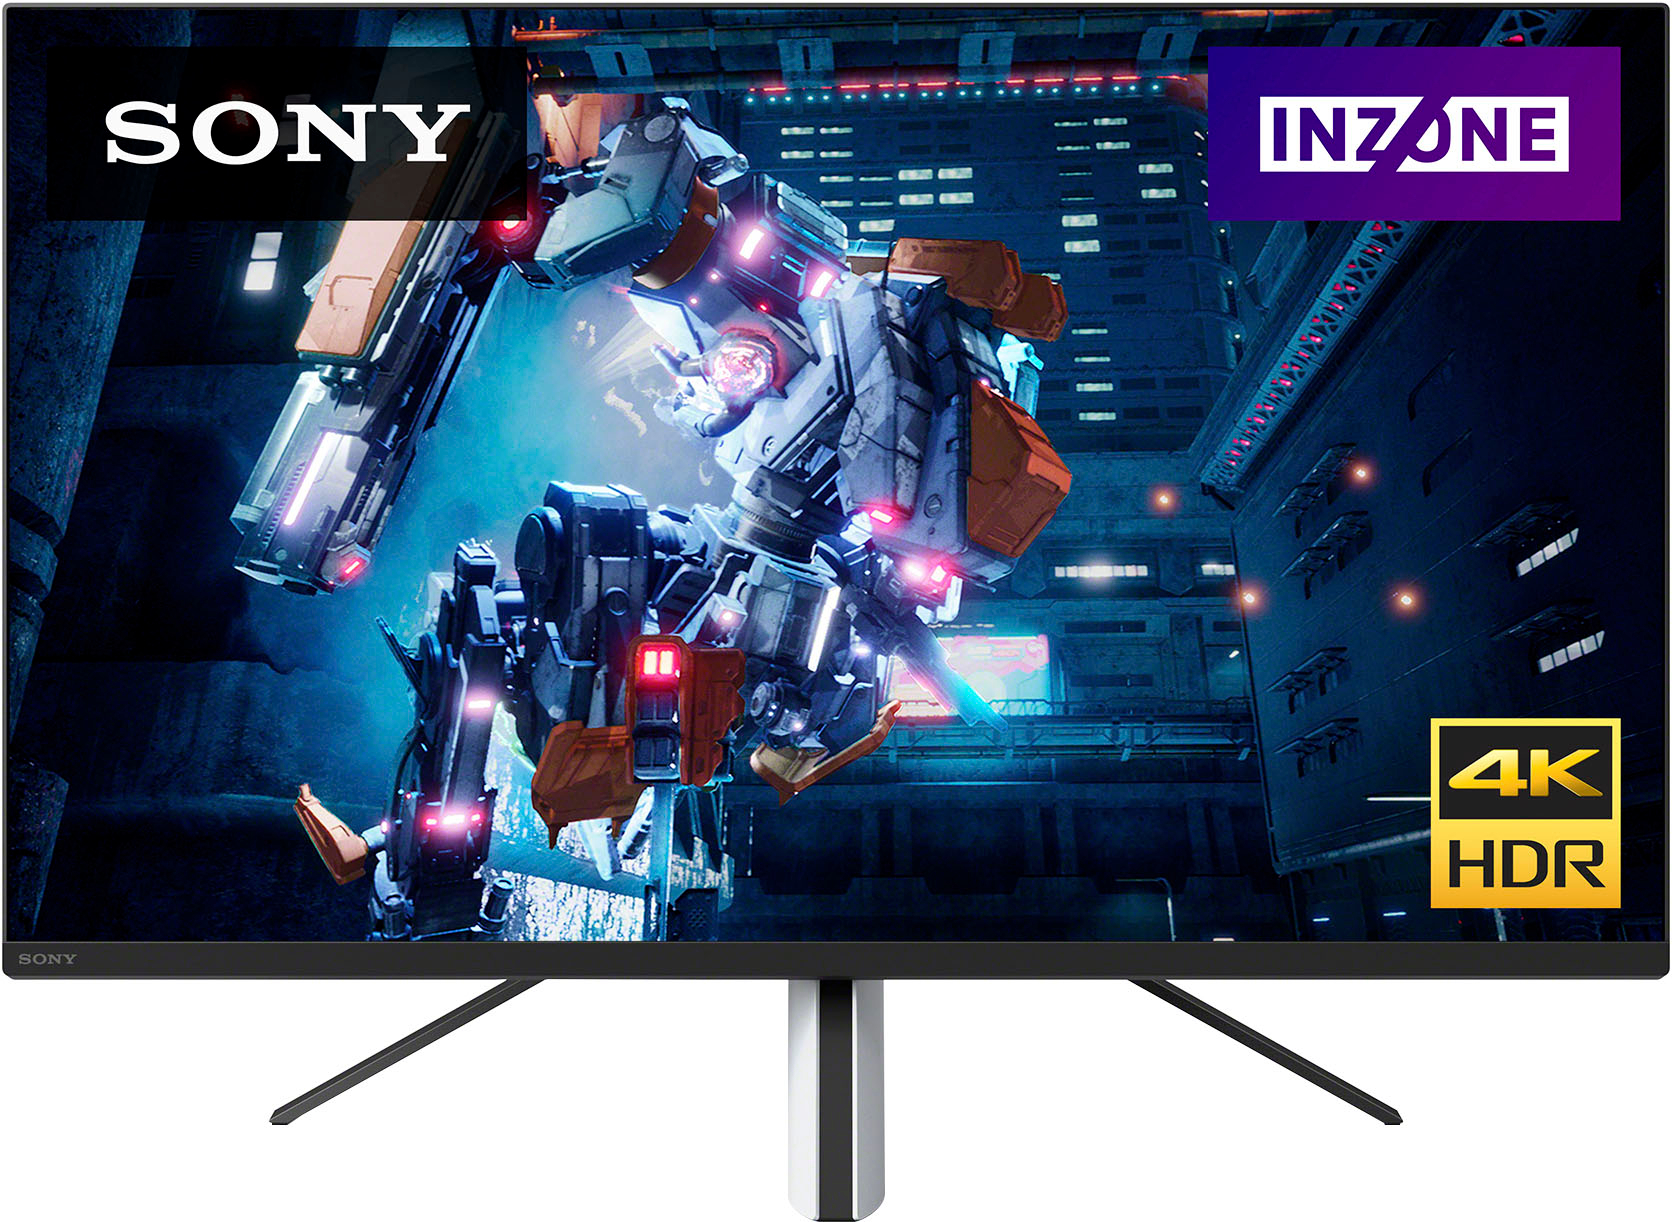 Sony 27” INZONE M9 4K HDR 144Hz Gaming Monitor with Full Array 